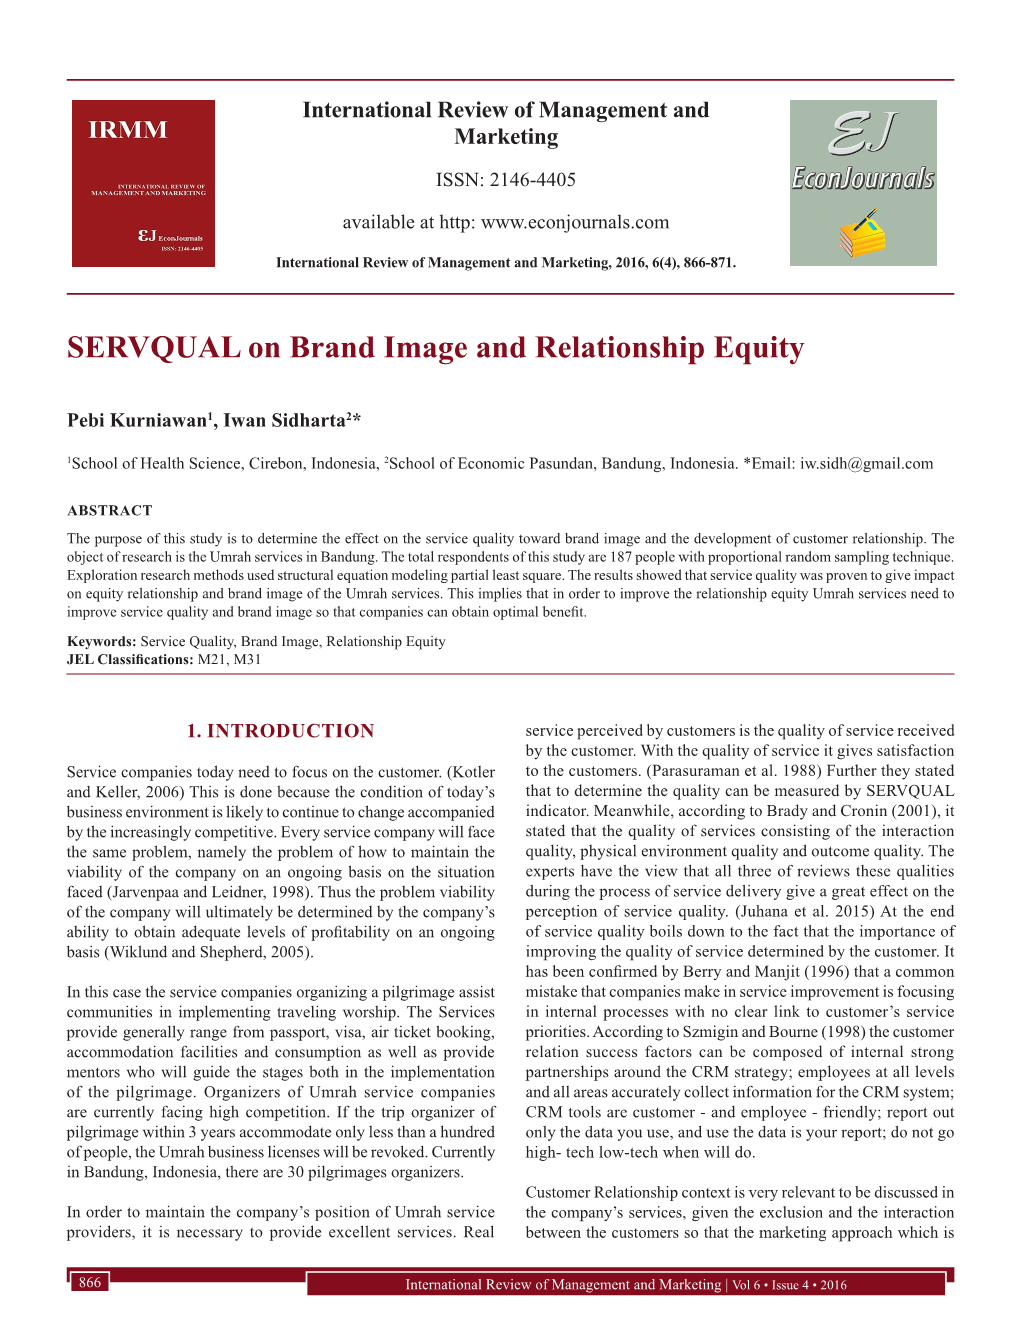 SERVQUAL on Brand Image and Relationship Equity